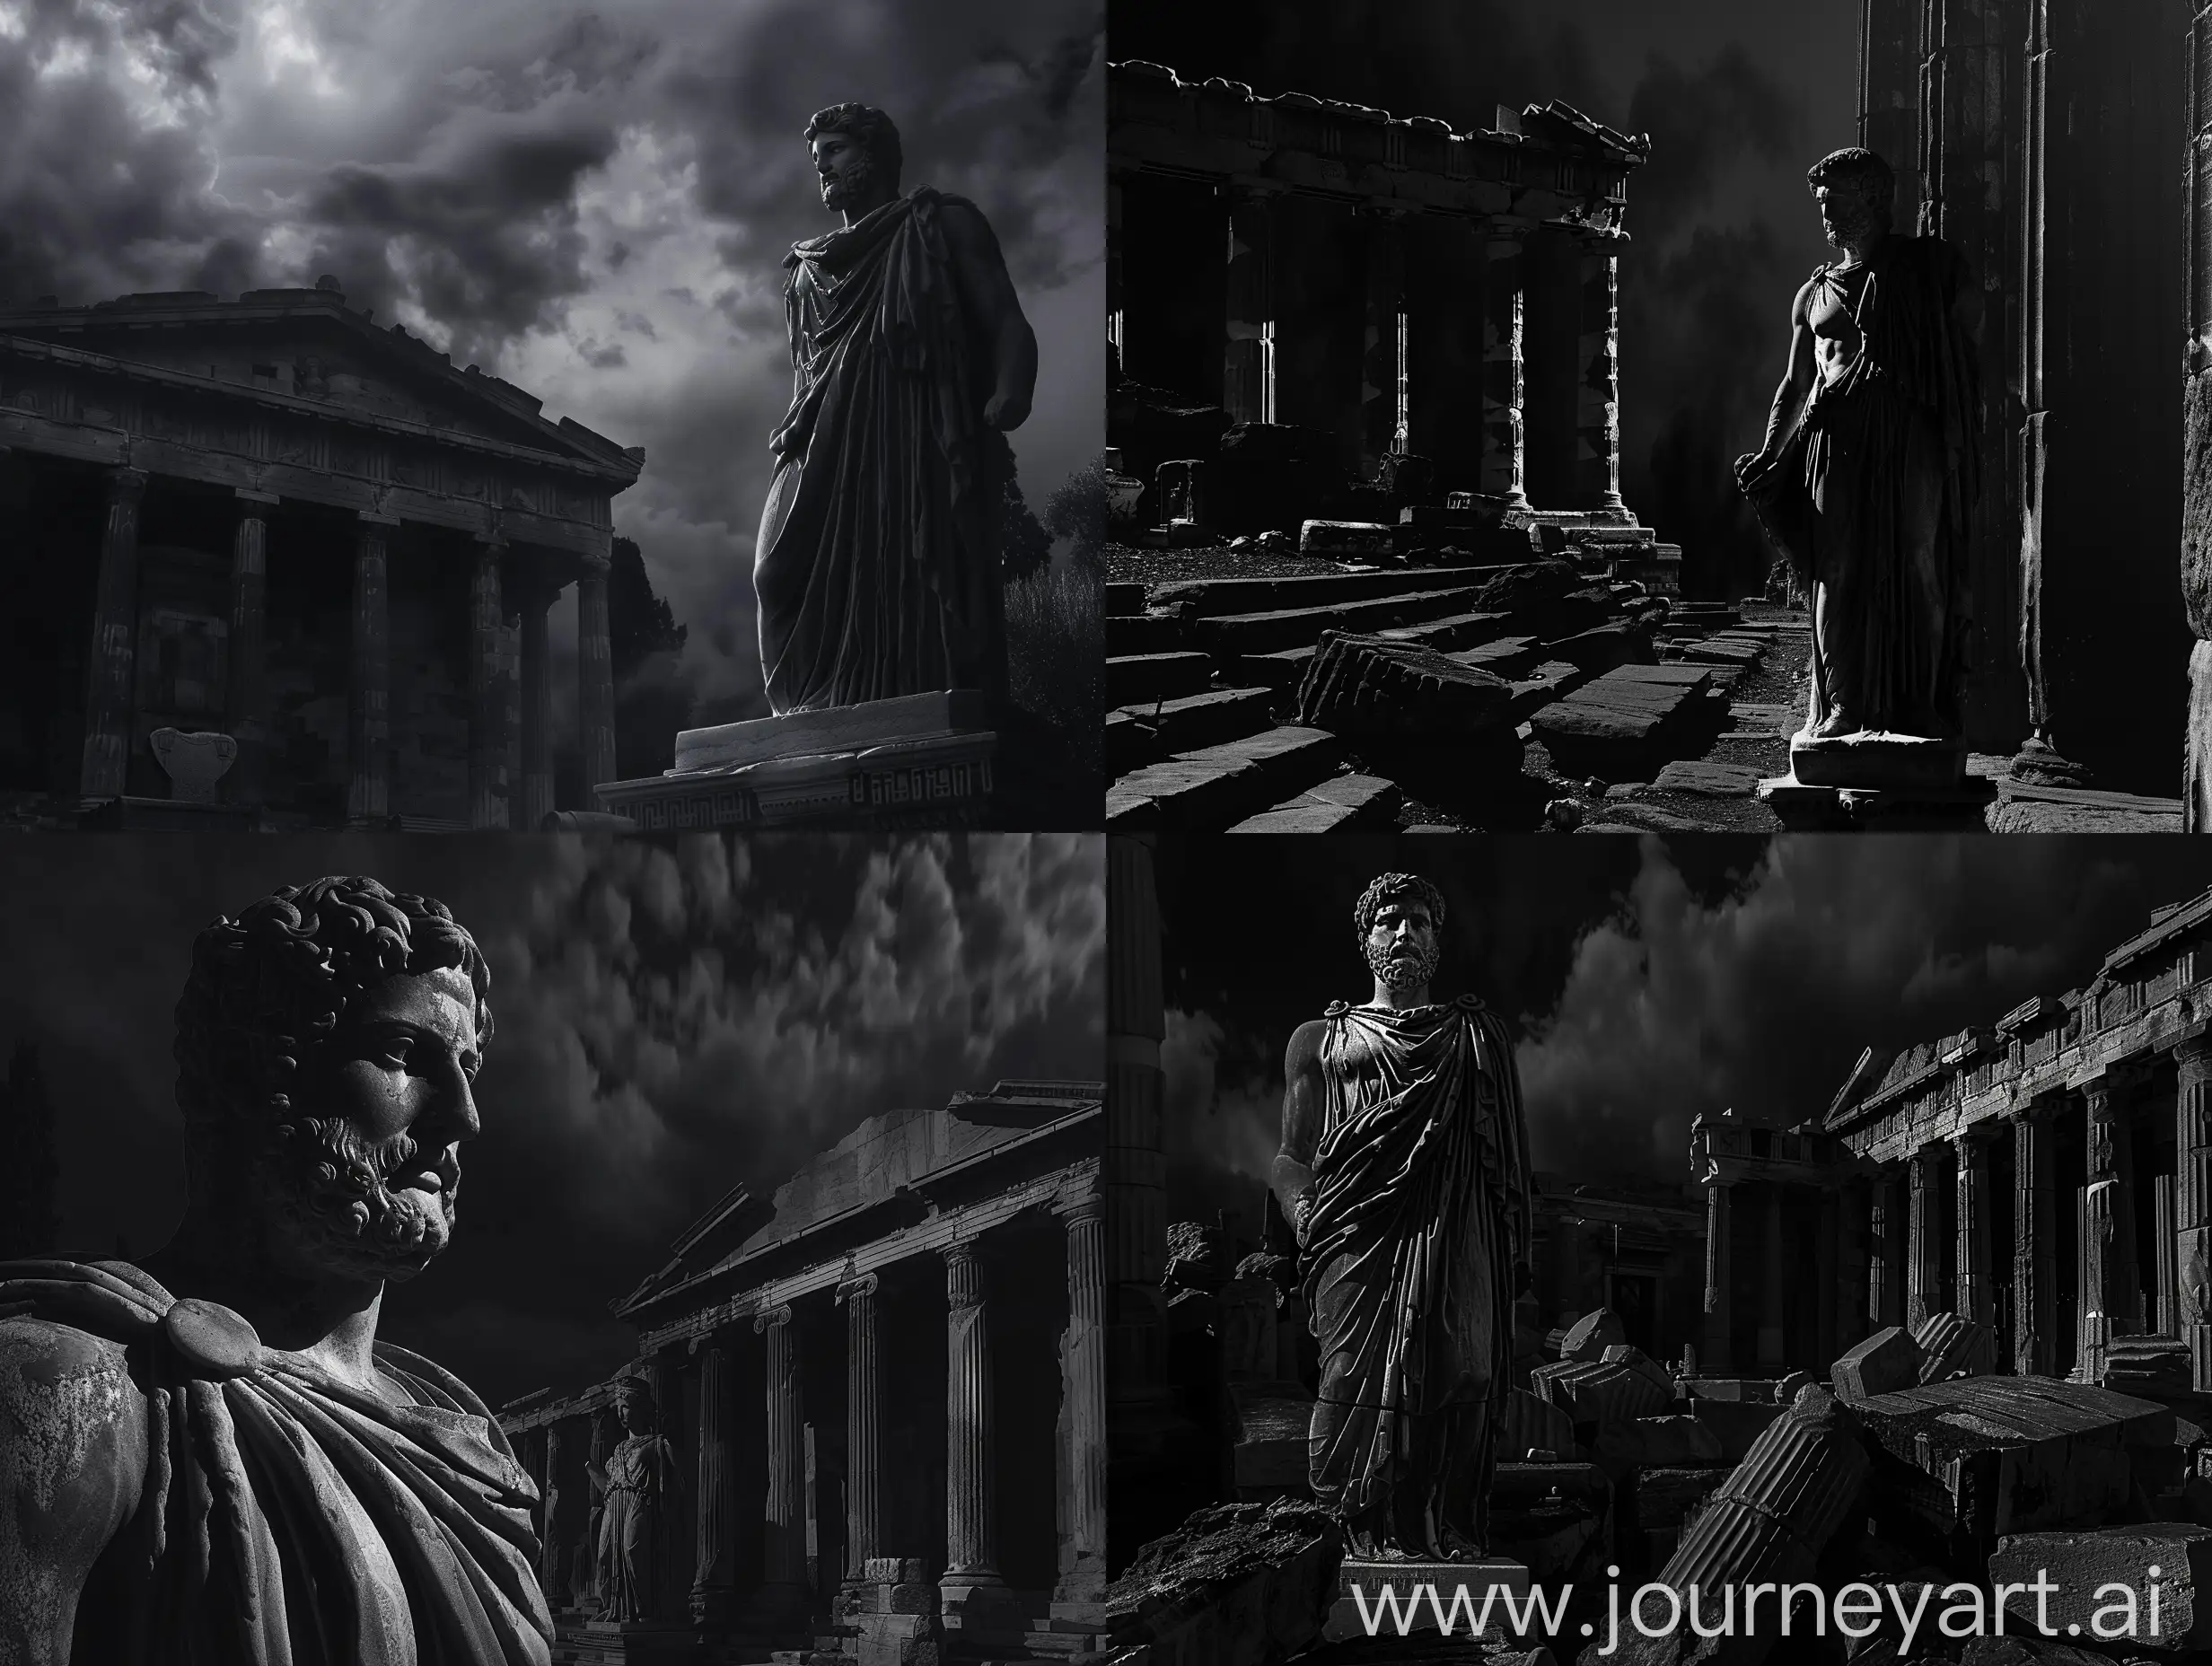 A dark landscape image of an ancient greek society deeply connected to stoicism, black and white, ancient greek architecture, include one single big statue of a stereotypical strong greek man, marcus aurelius
